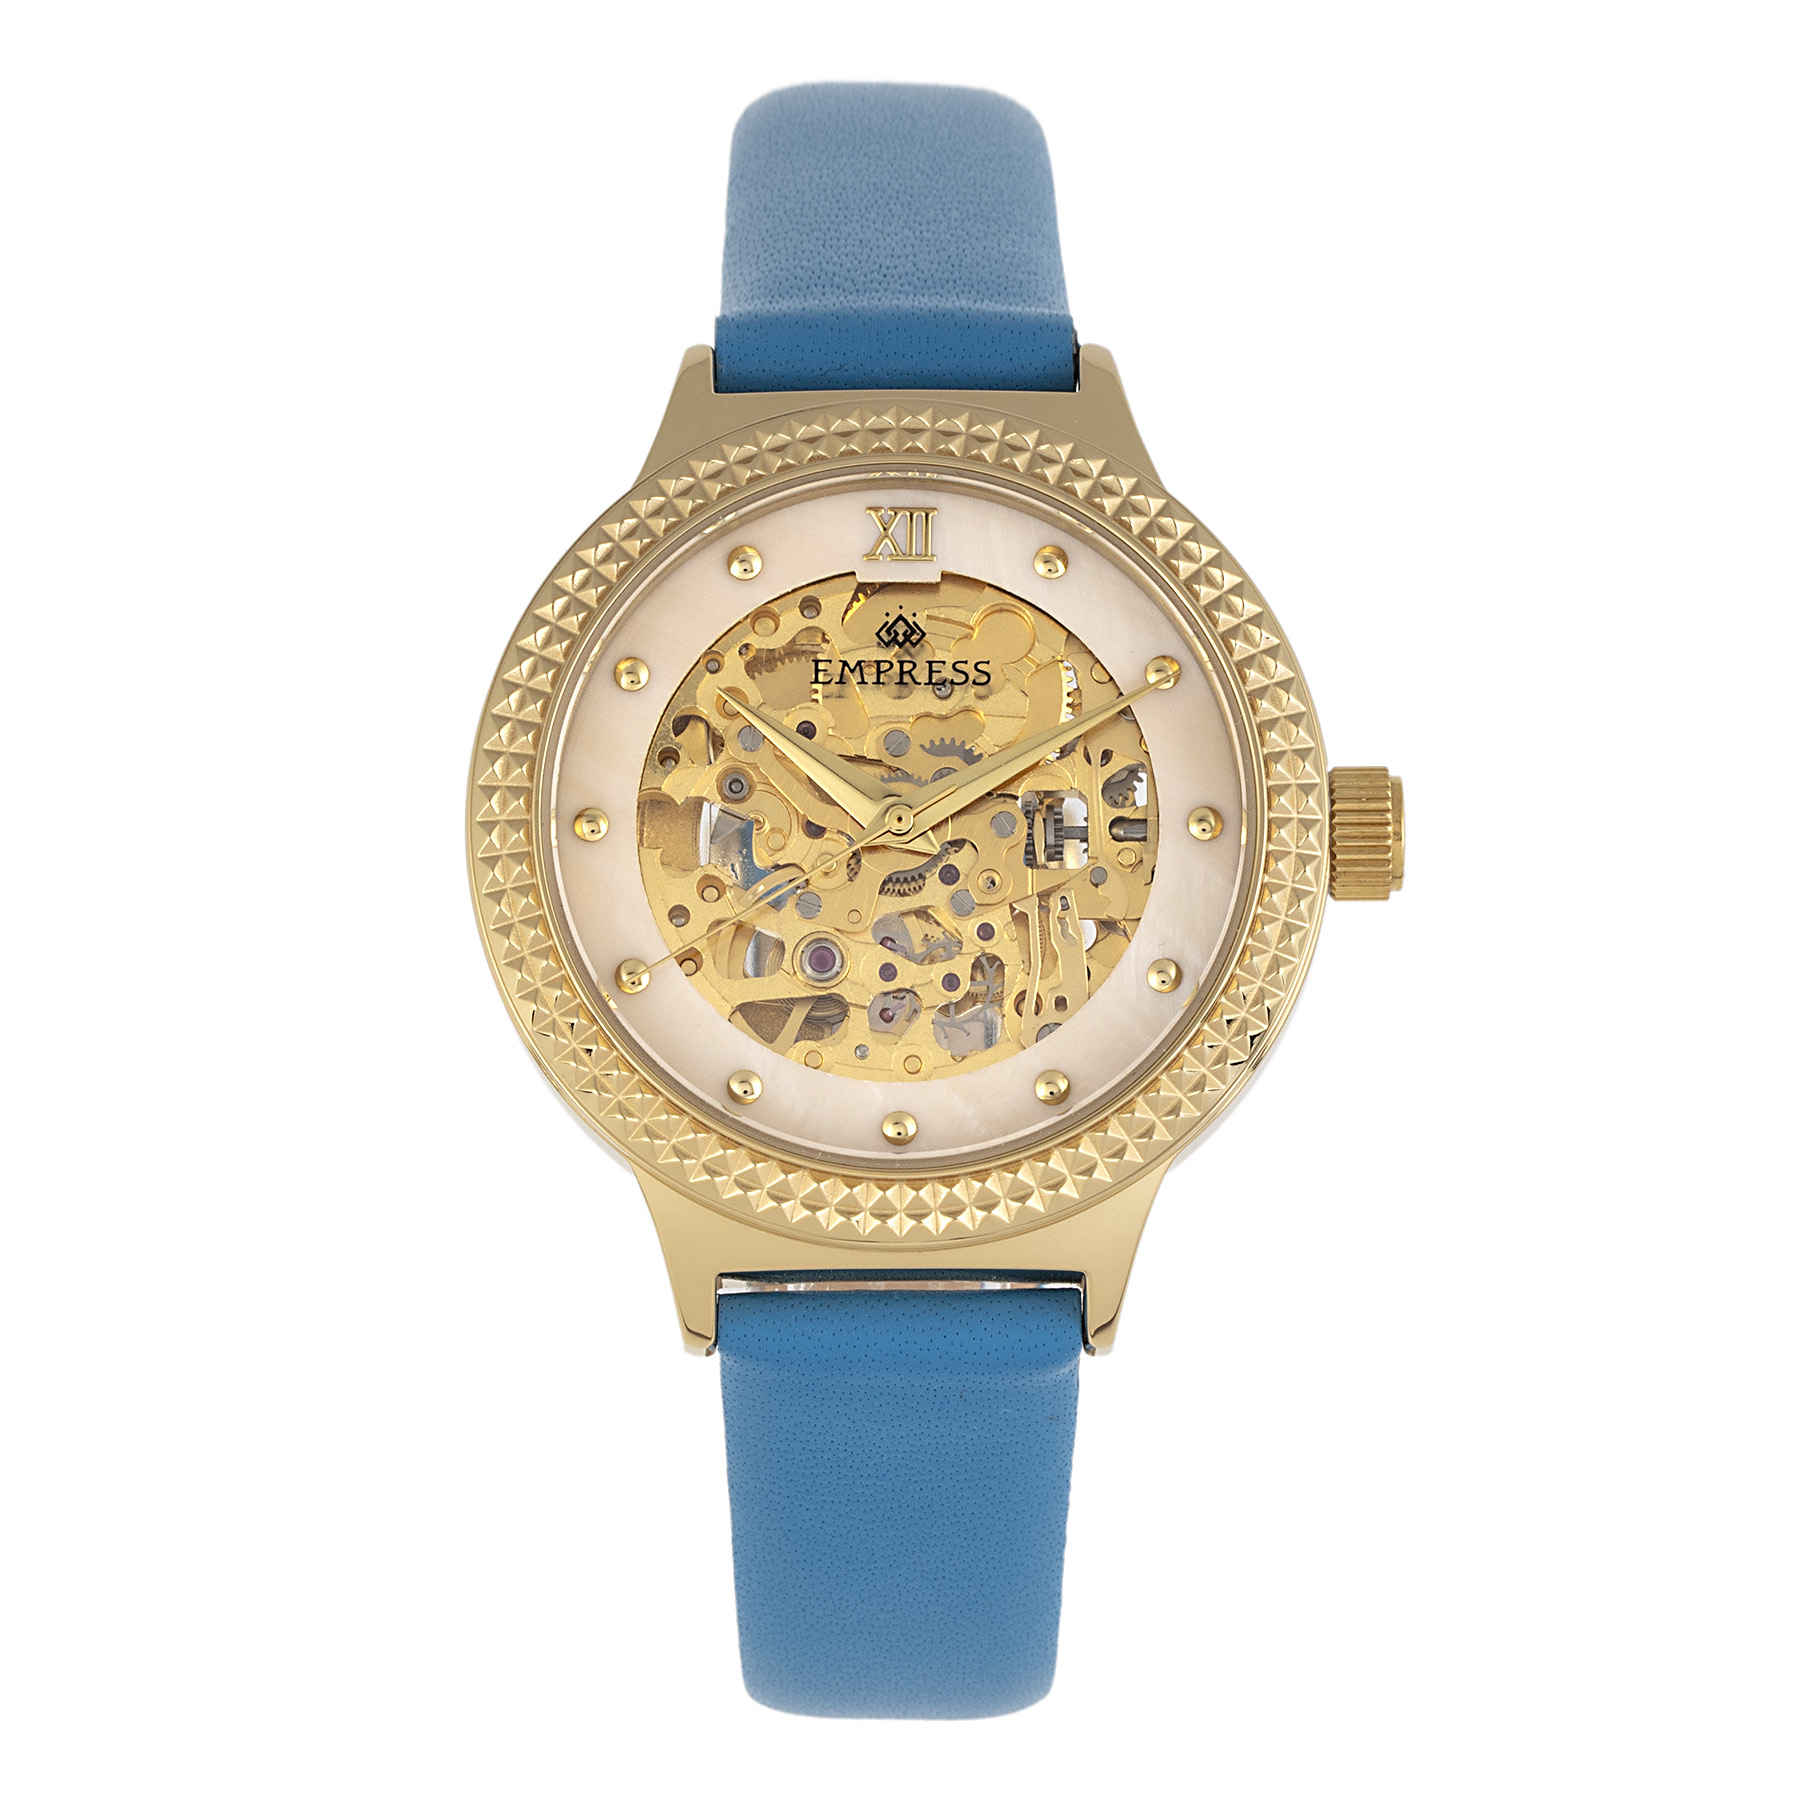 Empress Alice Automatic White Dial Ladies Watch Empem3204 In Blue / Gold / Gold Tone / Mop / Skeleton / White